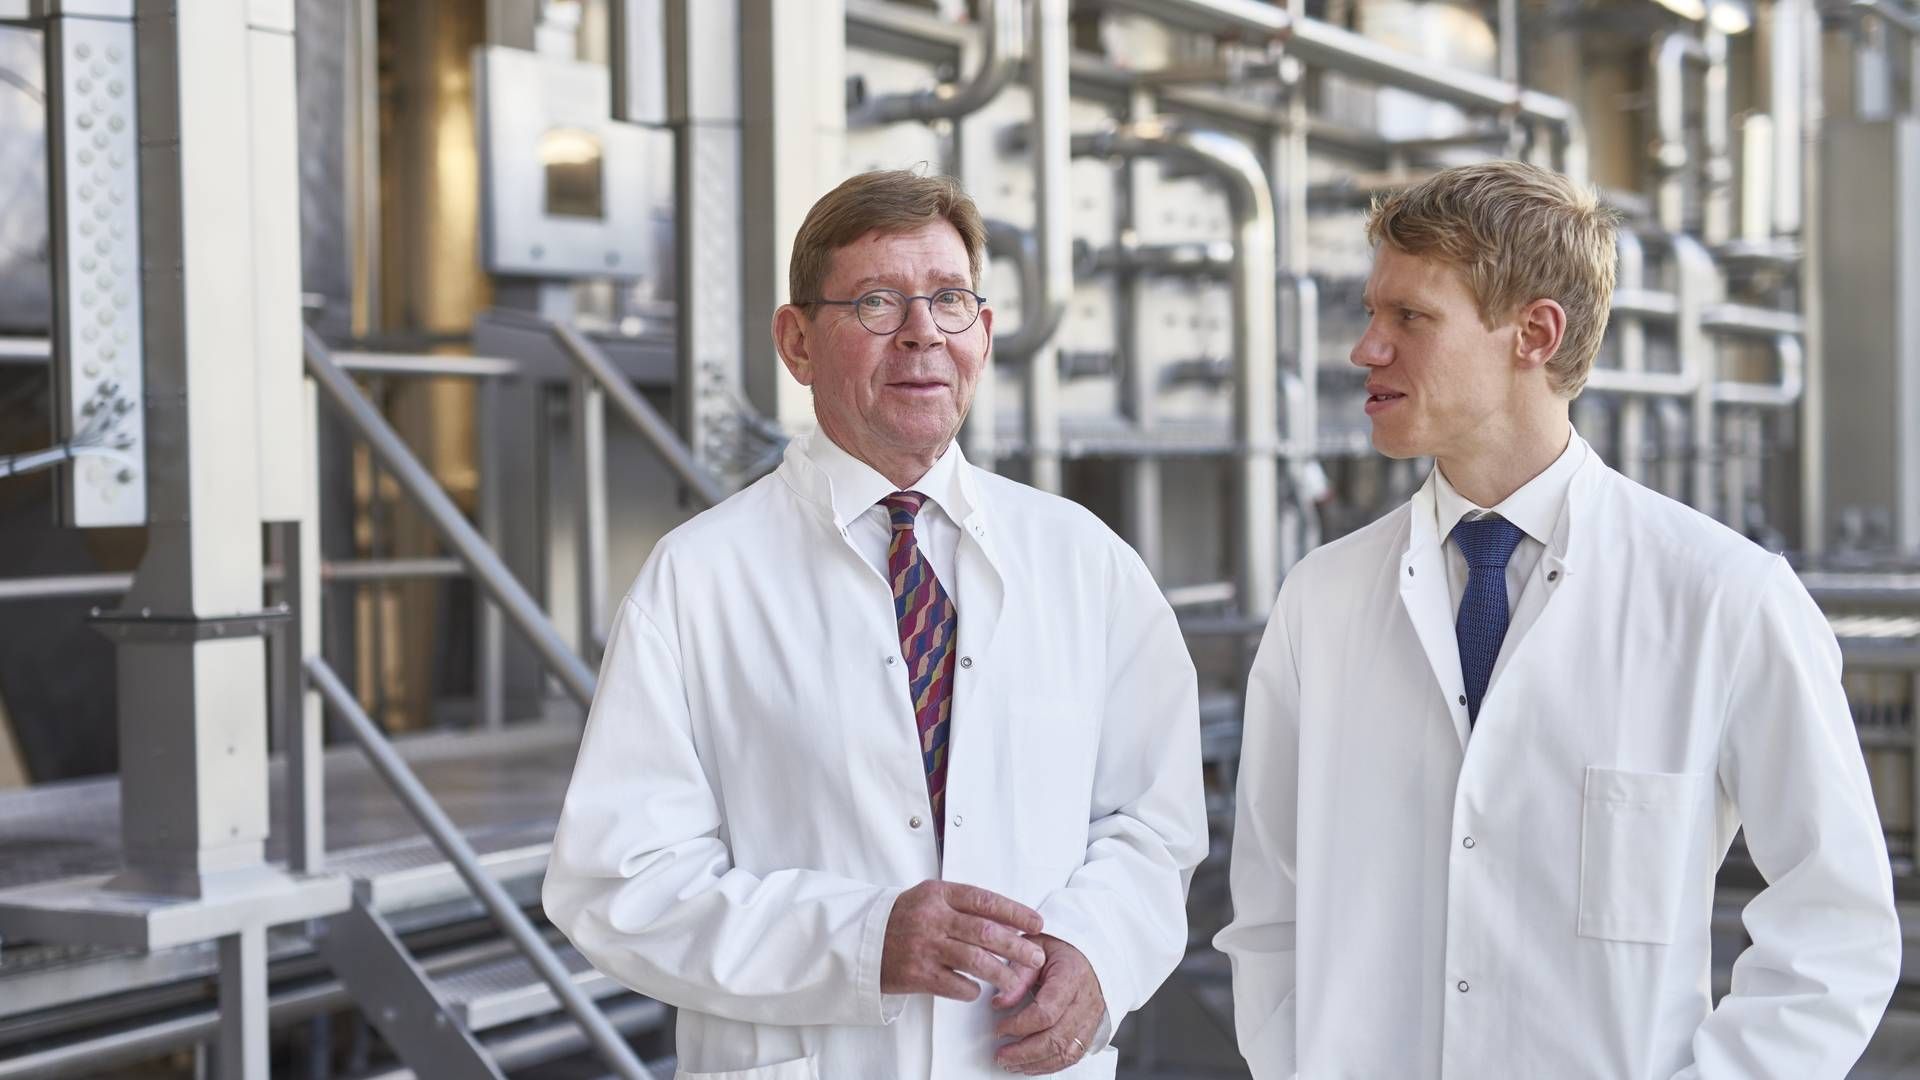 Proving that the apple doesn’t fall far from the tree, Tobias Christensen (right) will follow in the footsteps of his father, Lars Christensen (eft), and become chief executive of Pharmacosmos | Photo: Pharmacosmos / PR